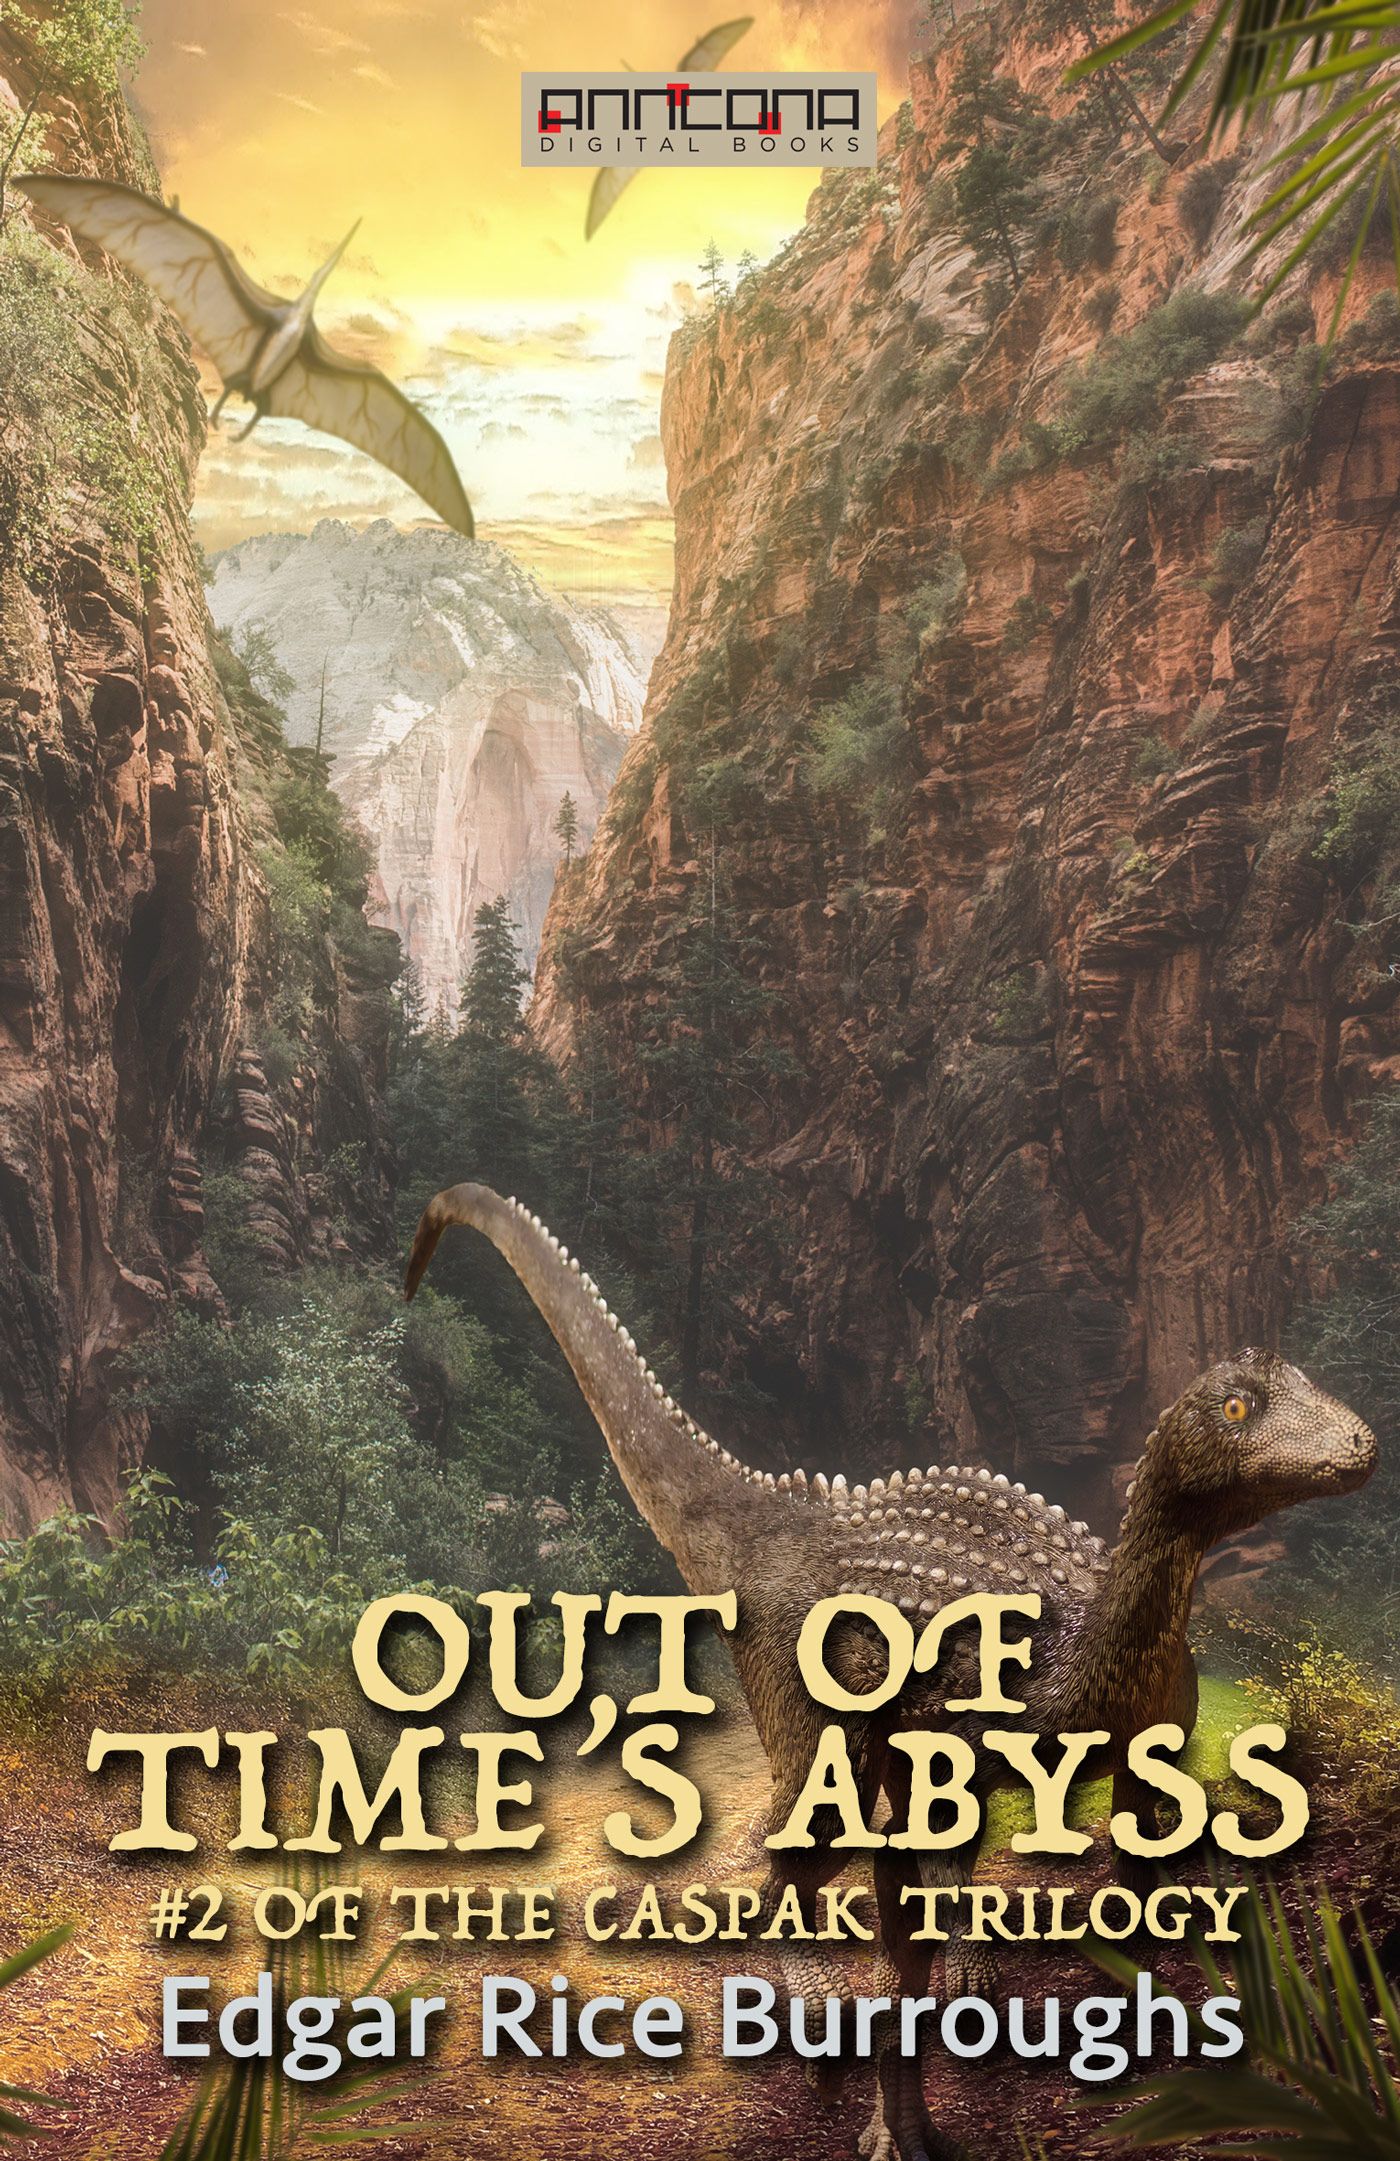 Out of Time's Abyss, eBook by Edgar Rice Burroughs